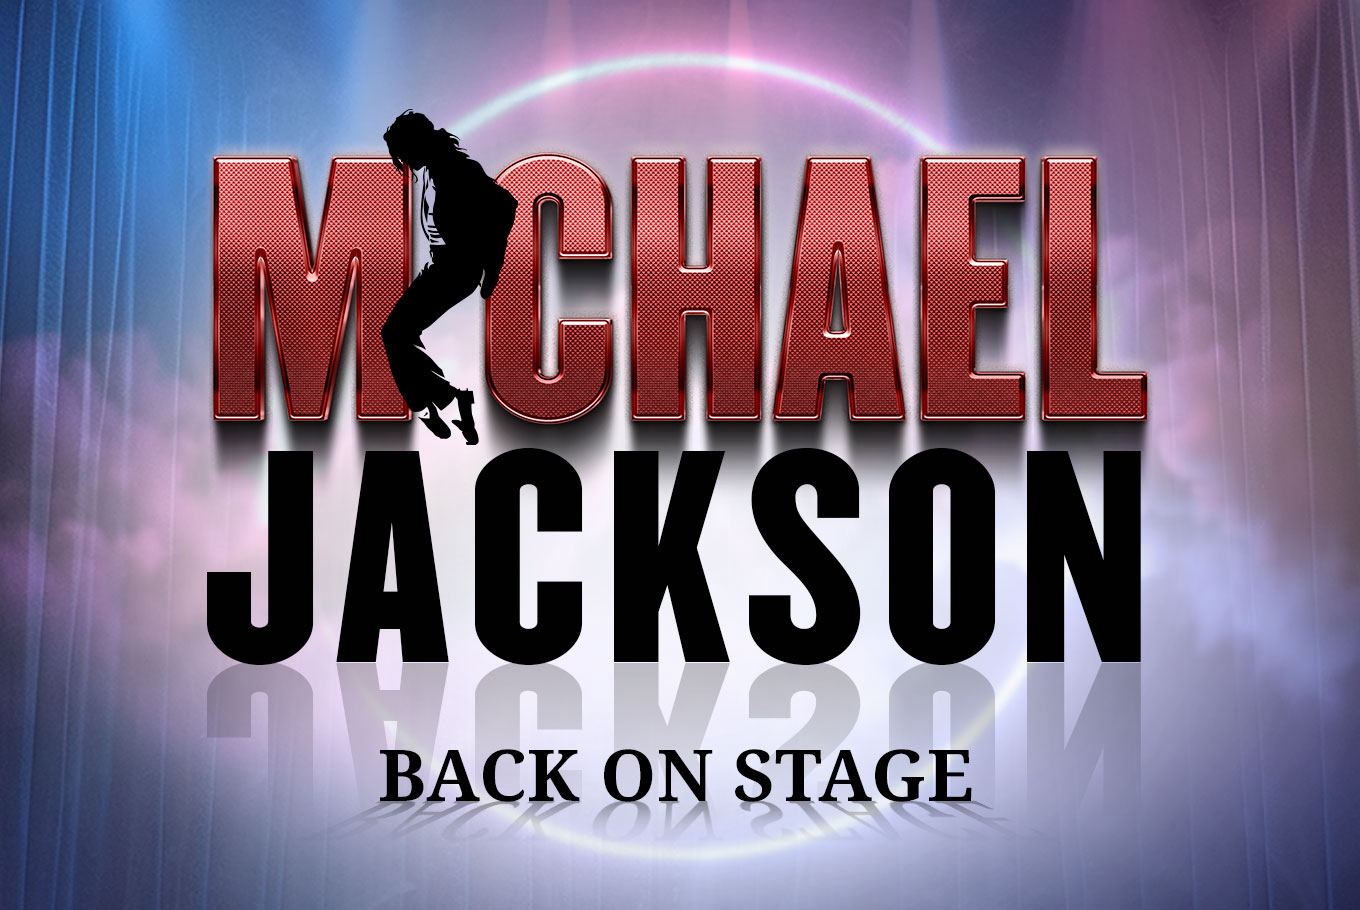 MICHAEL JACKSON BACK ON STAGE (WED TO SAT)